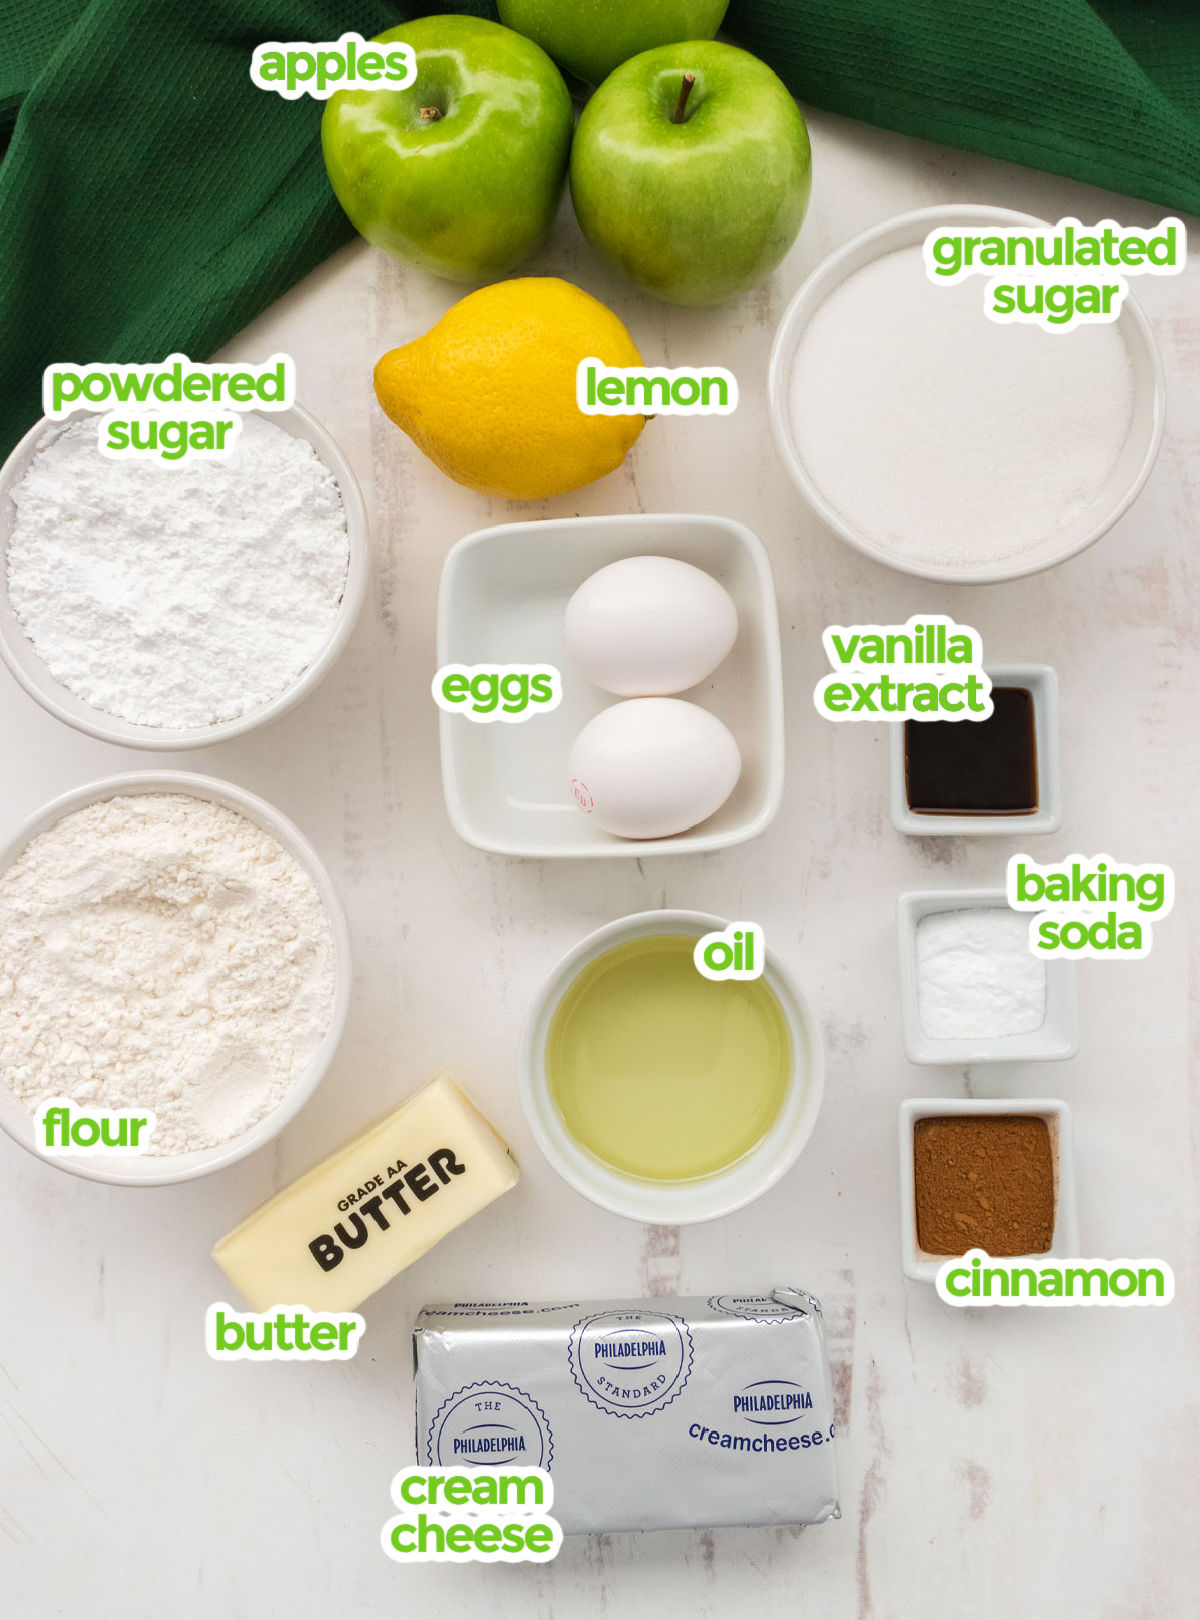 All the ingredients you will need to make Apple Cake including apples, lemon, granulated sugar, powdered sugar, eggs, vanilla extract, baking soda, cinnamon, oil, flour, butter and cream cheese.